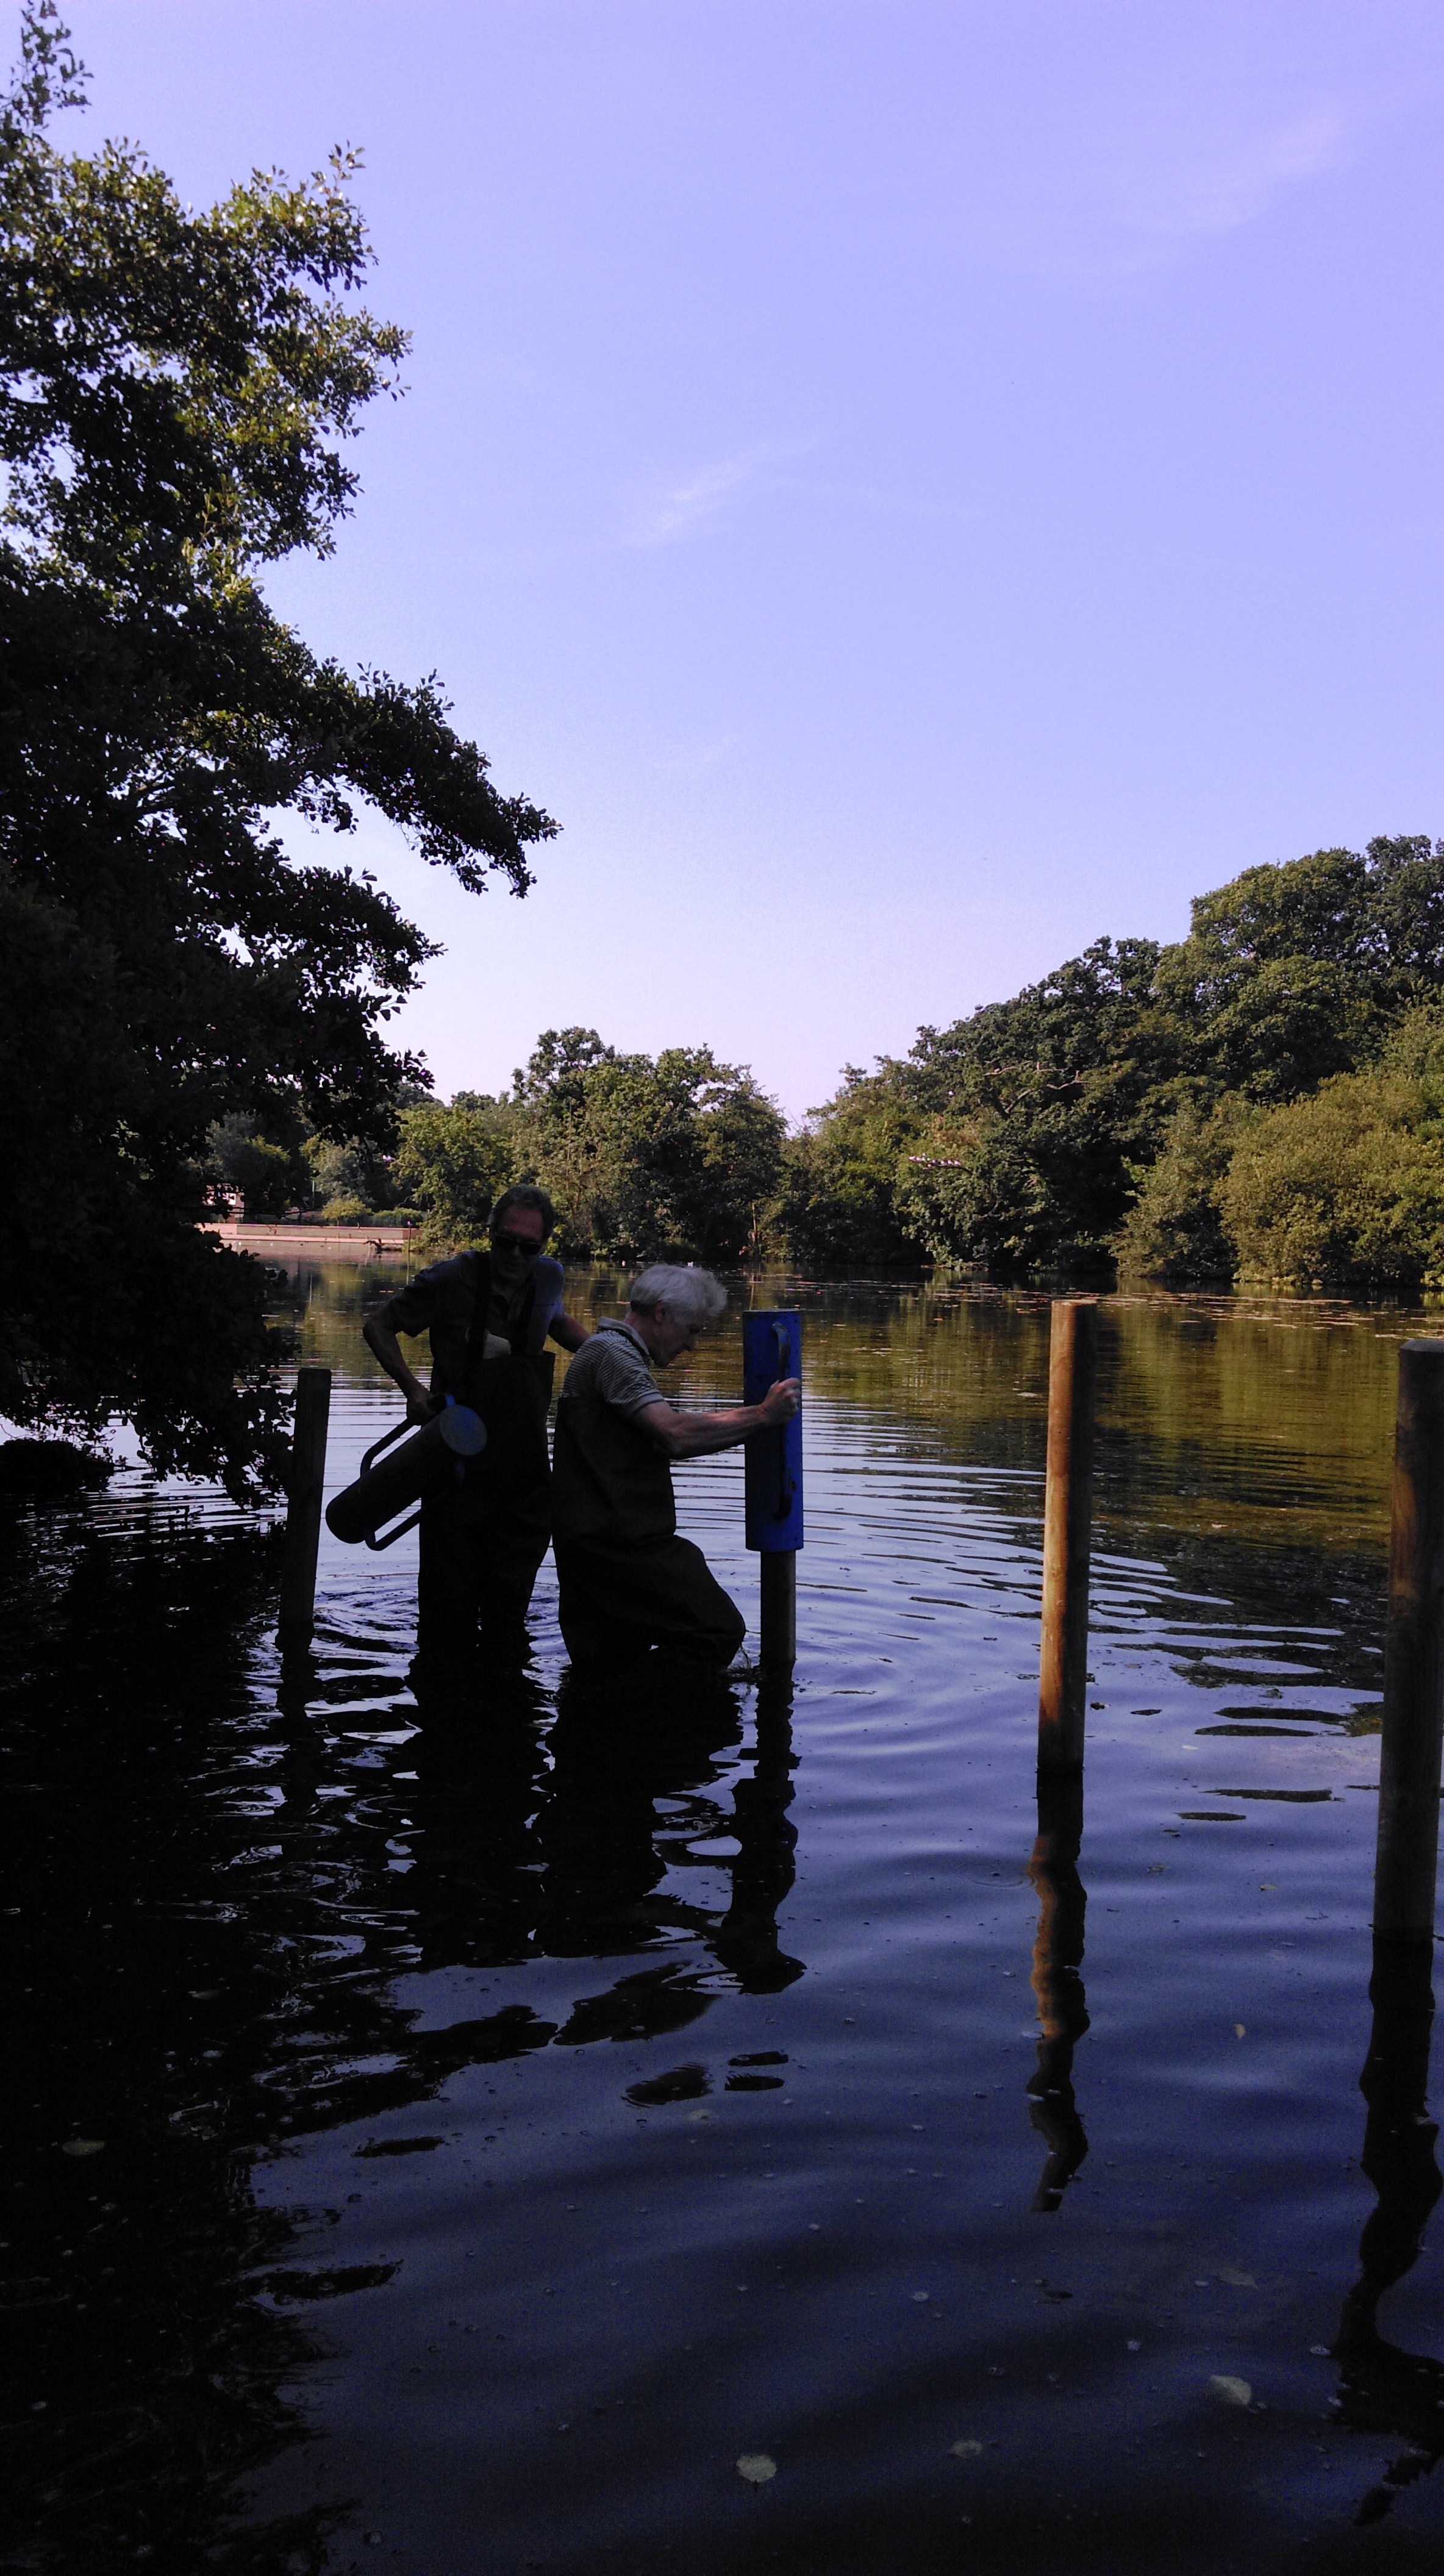 The Highams Park Snedders have been working at Highams Park Lake